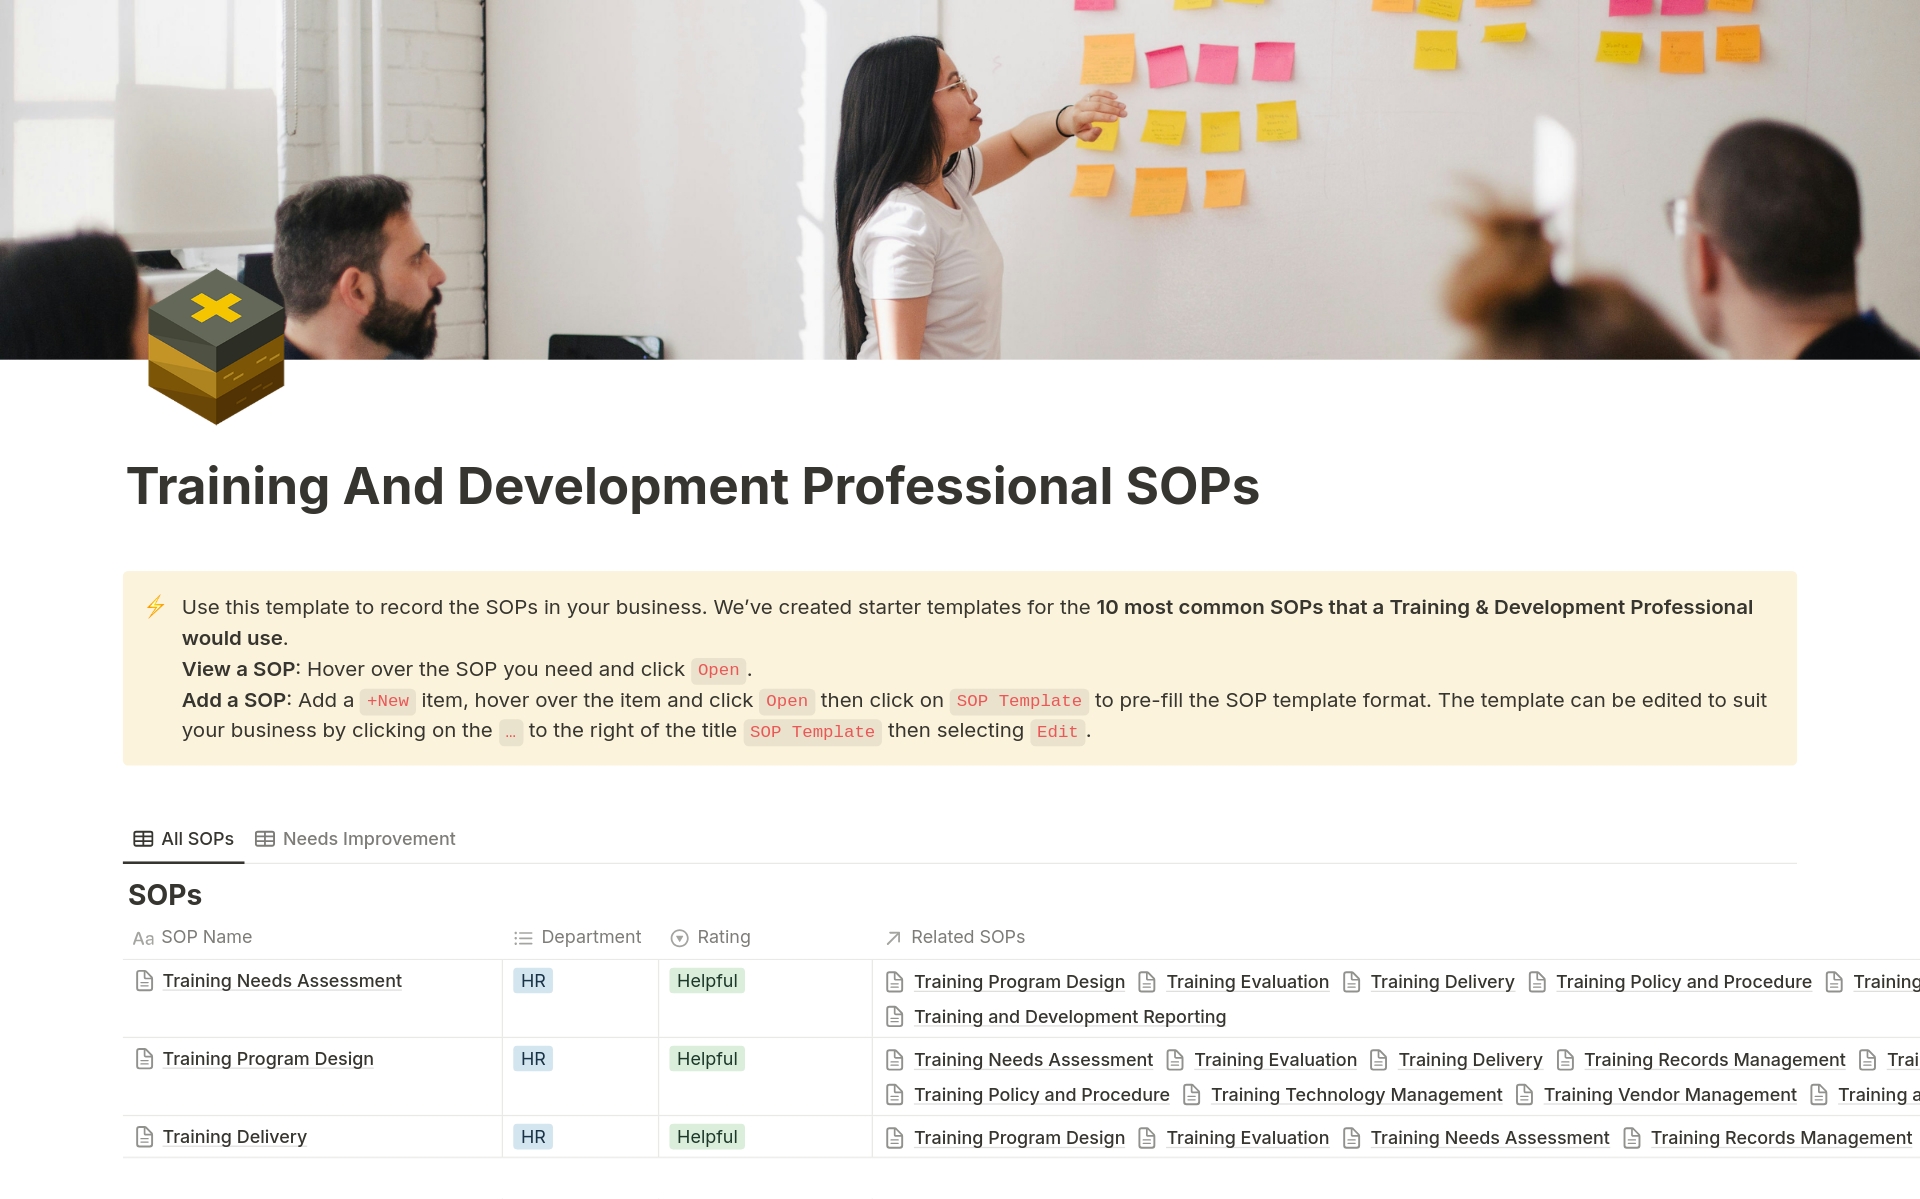 This template contains Standard Operating Procedures (SOPs) for a Training and Development Professional. It covers the entire training cycle, from identifying training needs to evaluating program effectiveness. Save 10 hours of research.